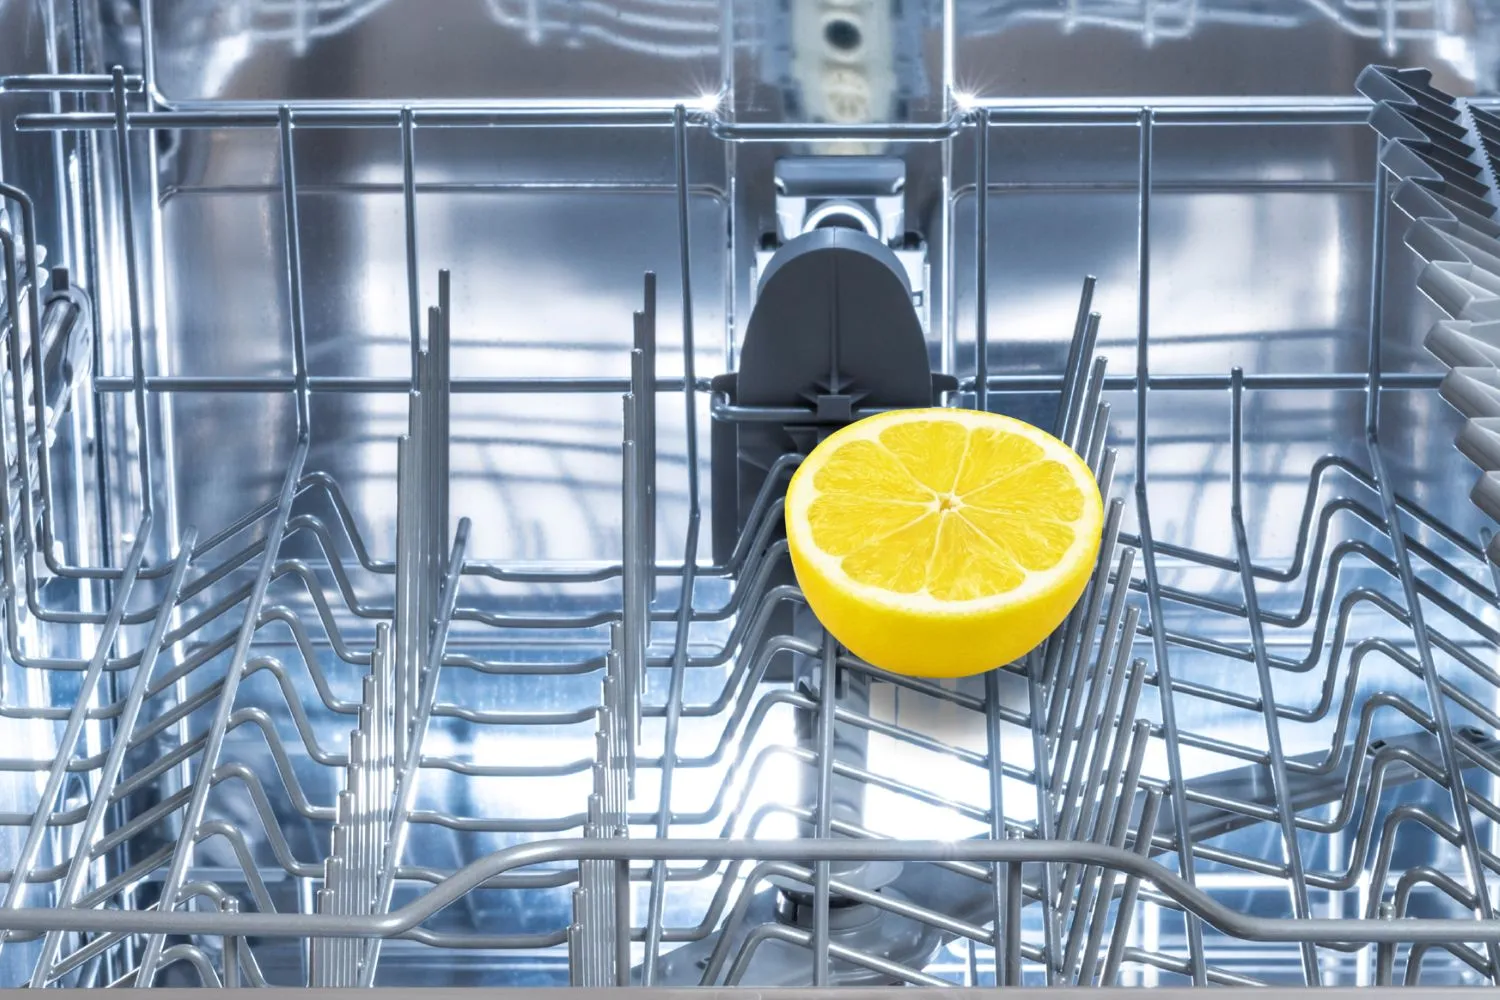 How To Clean a Dishwasher With a Lemon